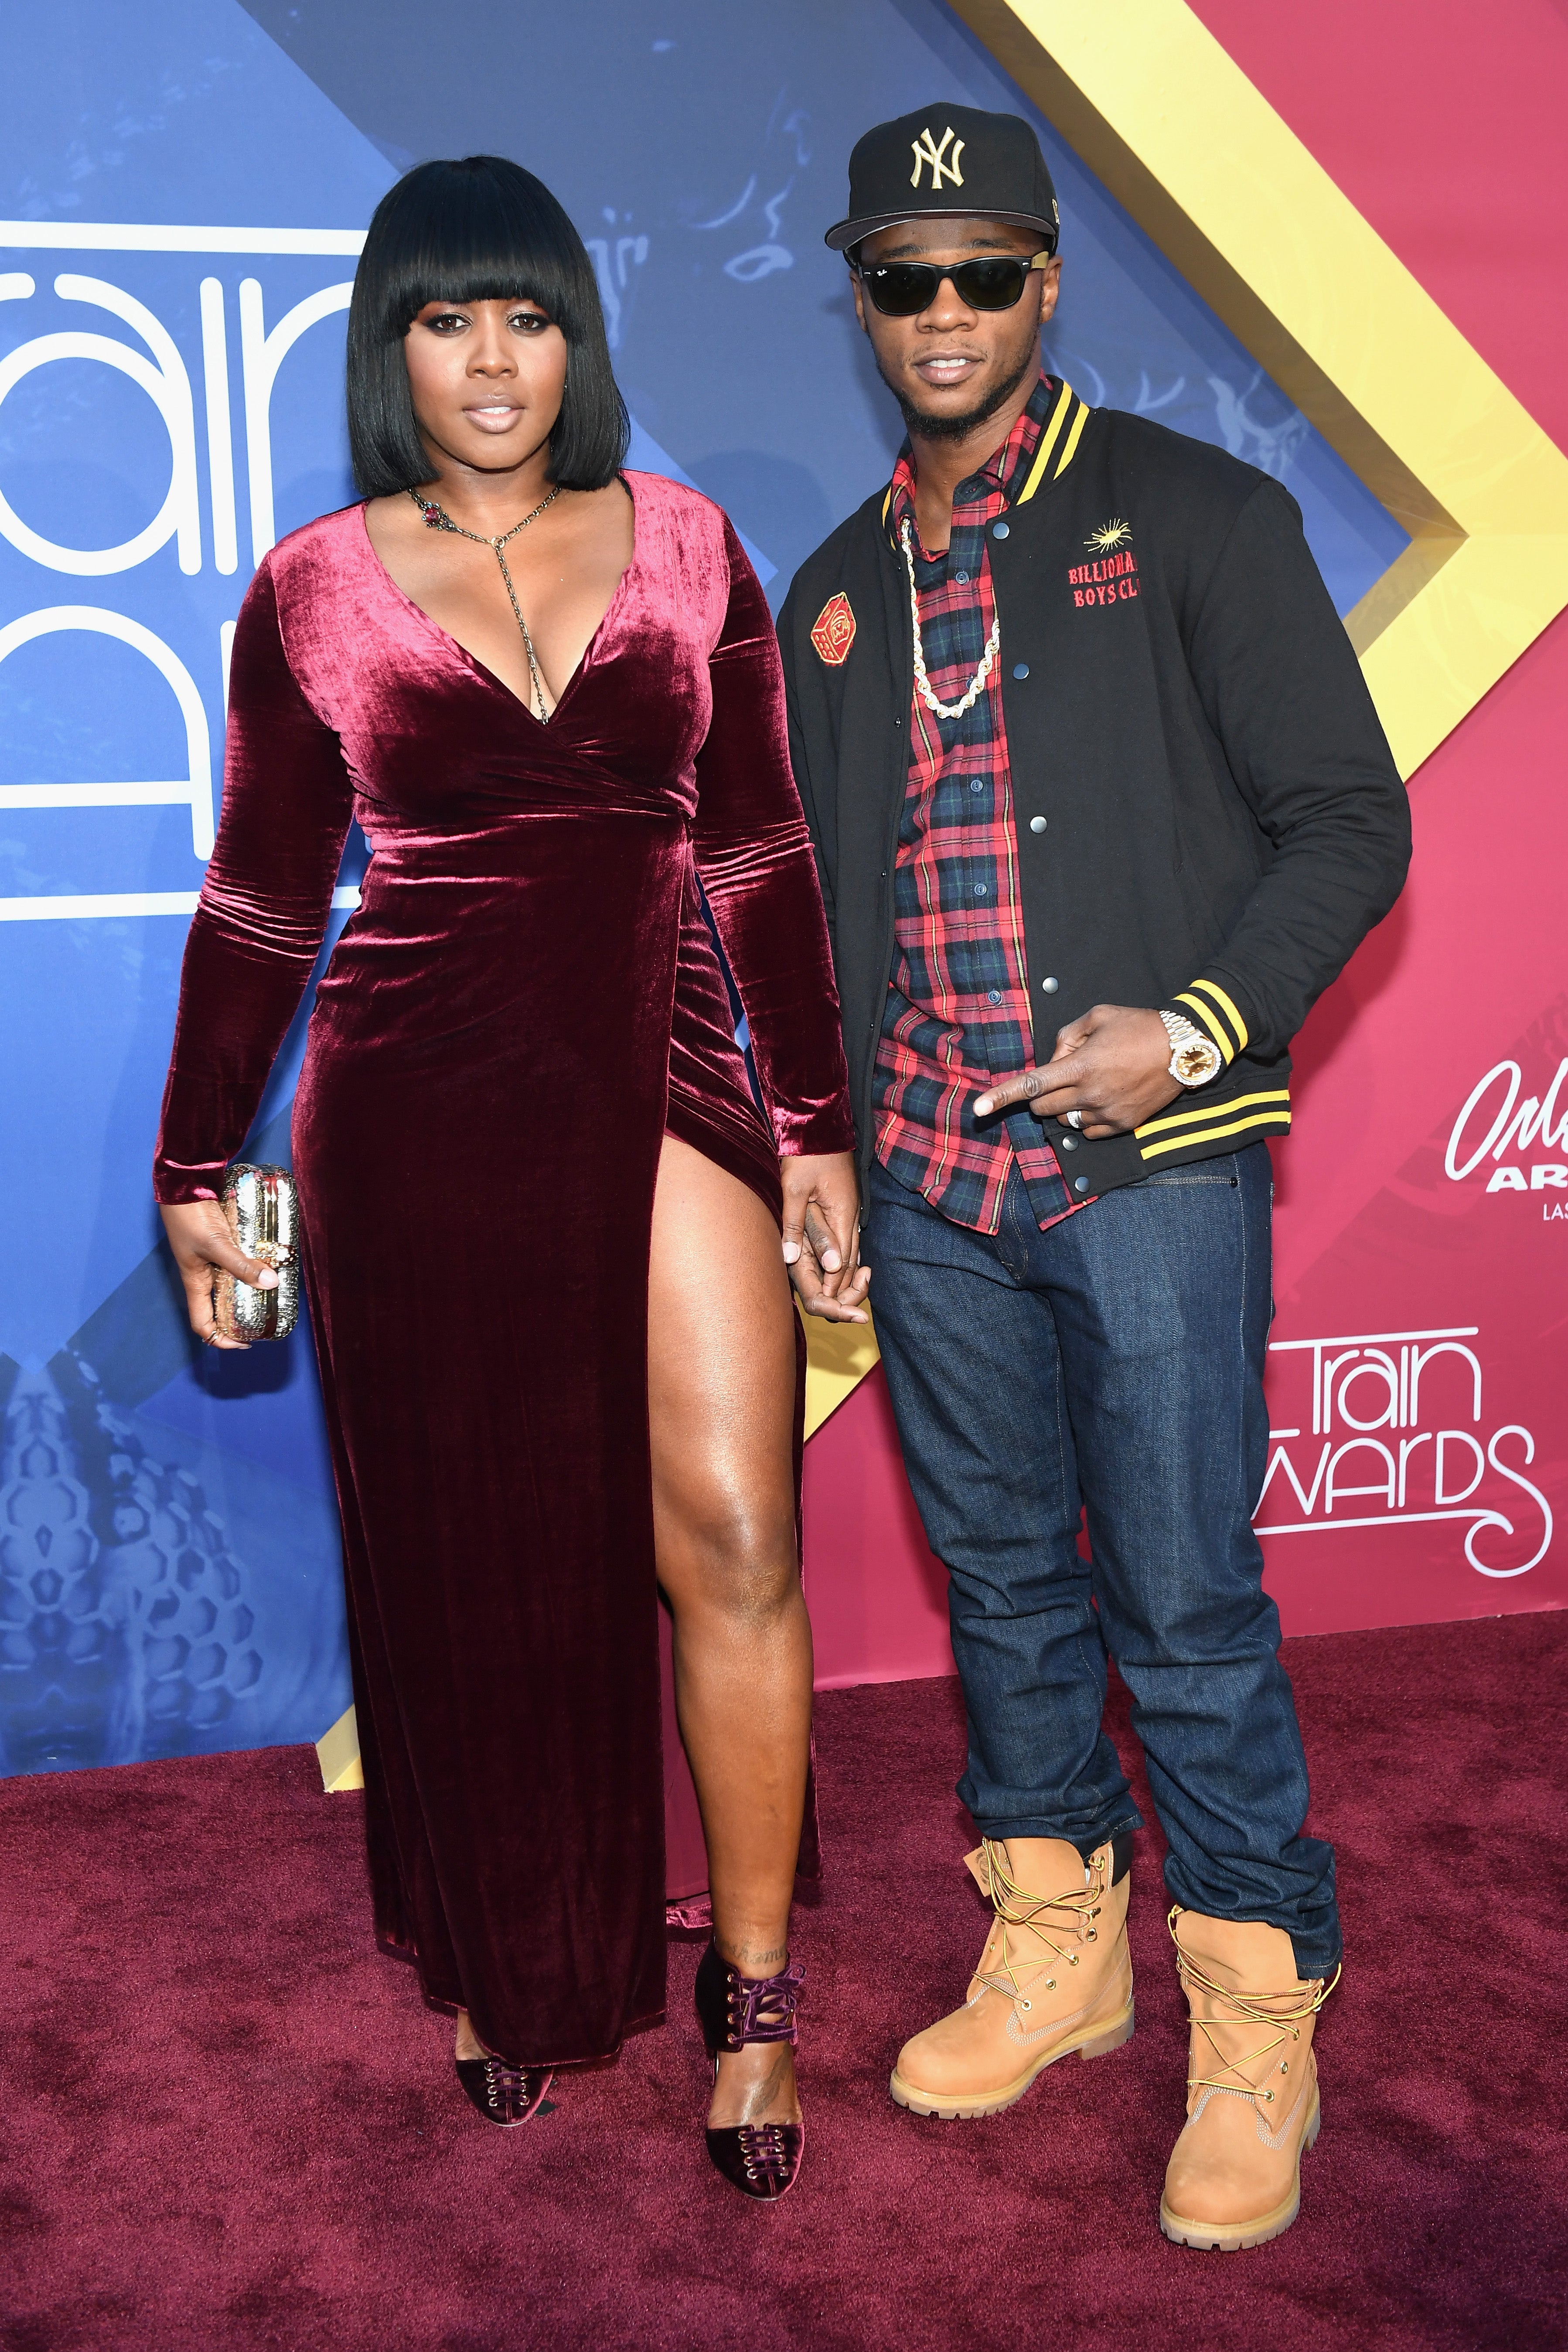 The Must-See Looks From the 2016 Soul Train Music Awards Red Carpet
